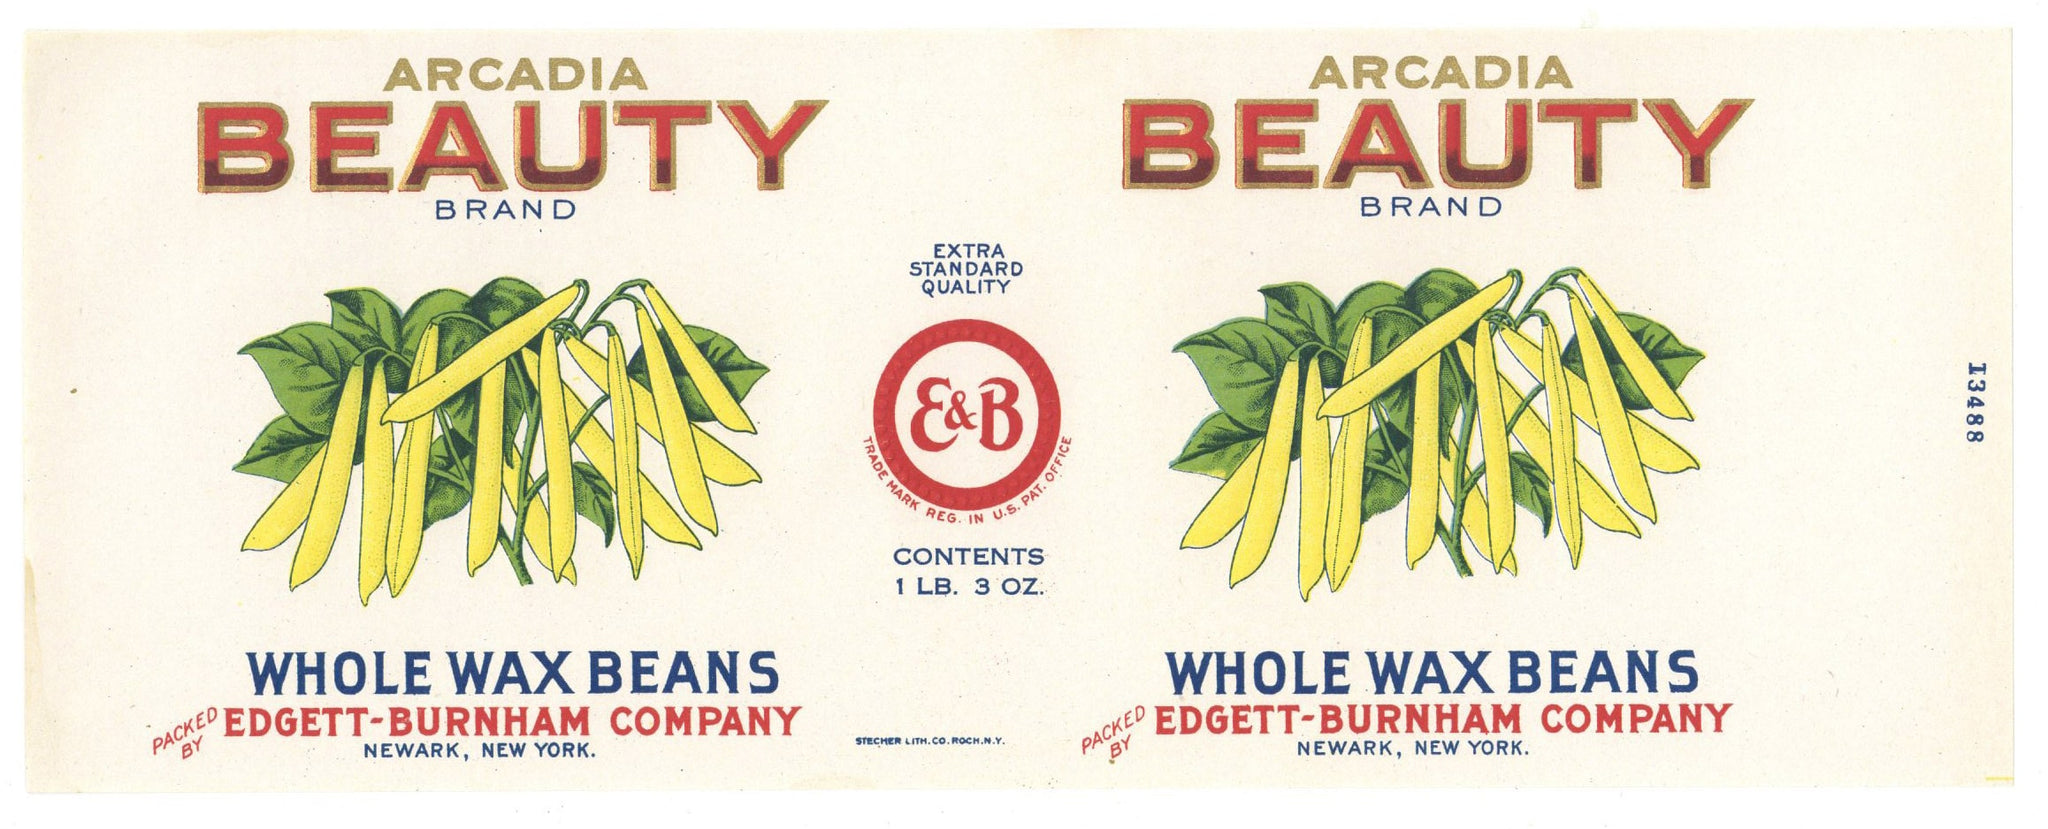 Arcadia Beauty Brand Vintage Wax Beans Can Label